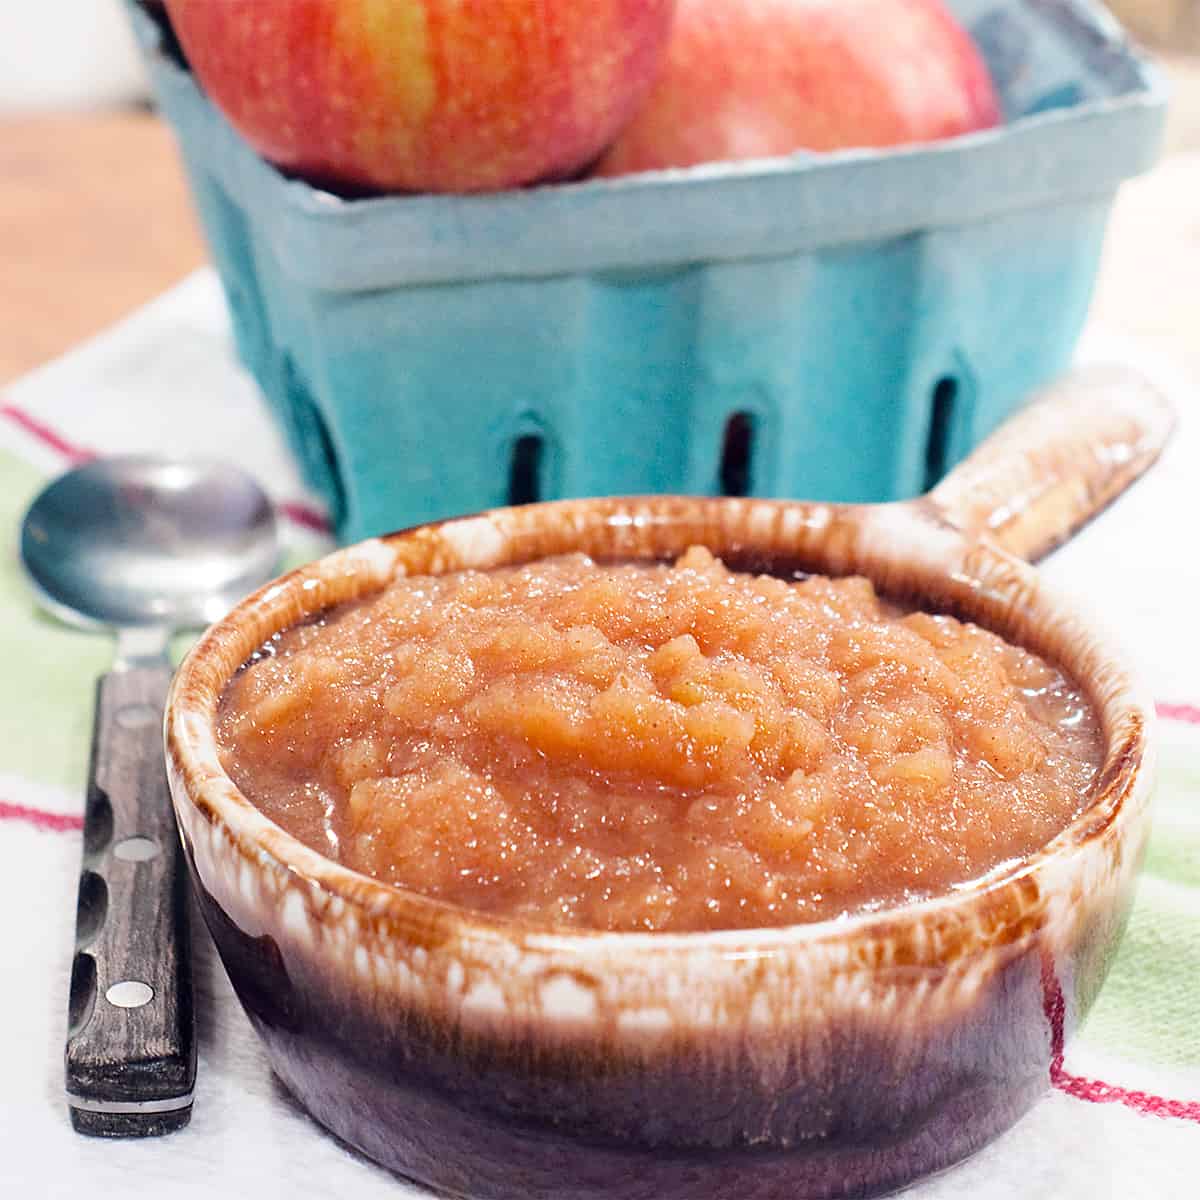 Bowl of applesauce with a basket of fresh apples on a kitchen towel.